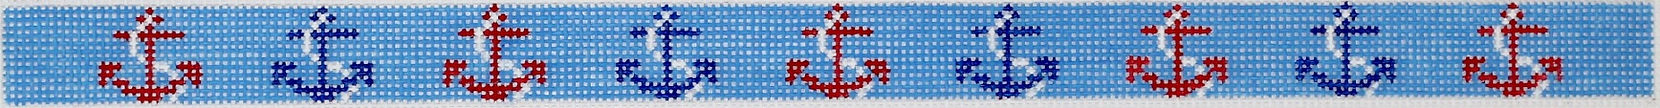 Sunglass Strap – Red, White & Blue Anchors on Cobalt Blue